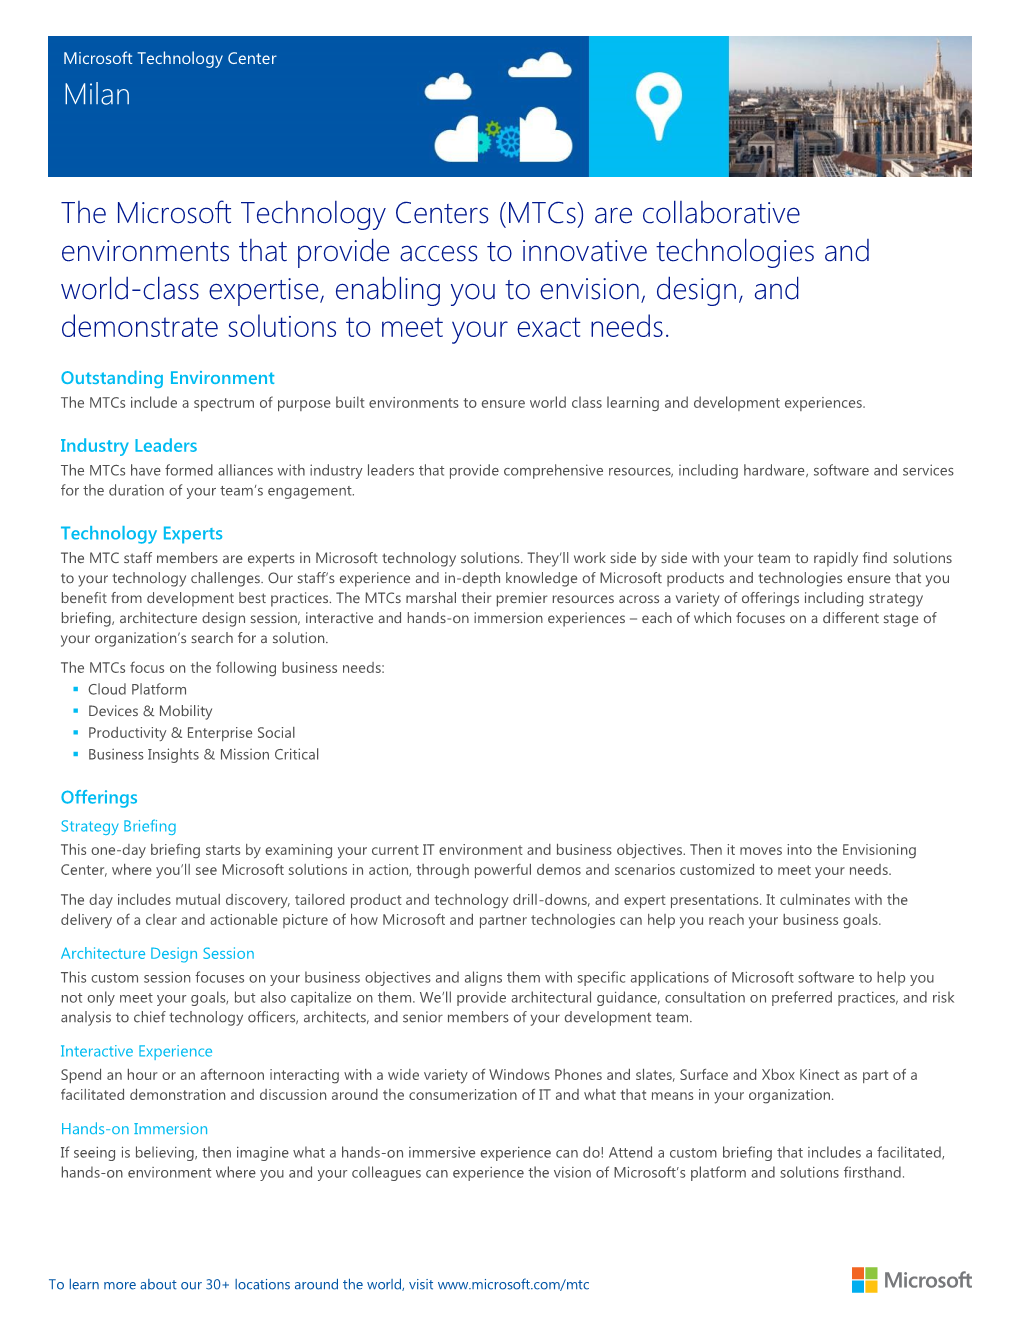 The Microsoft Technology Centers (Mtcs) Are Collaborative Environments That Provide